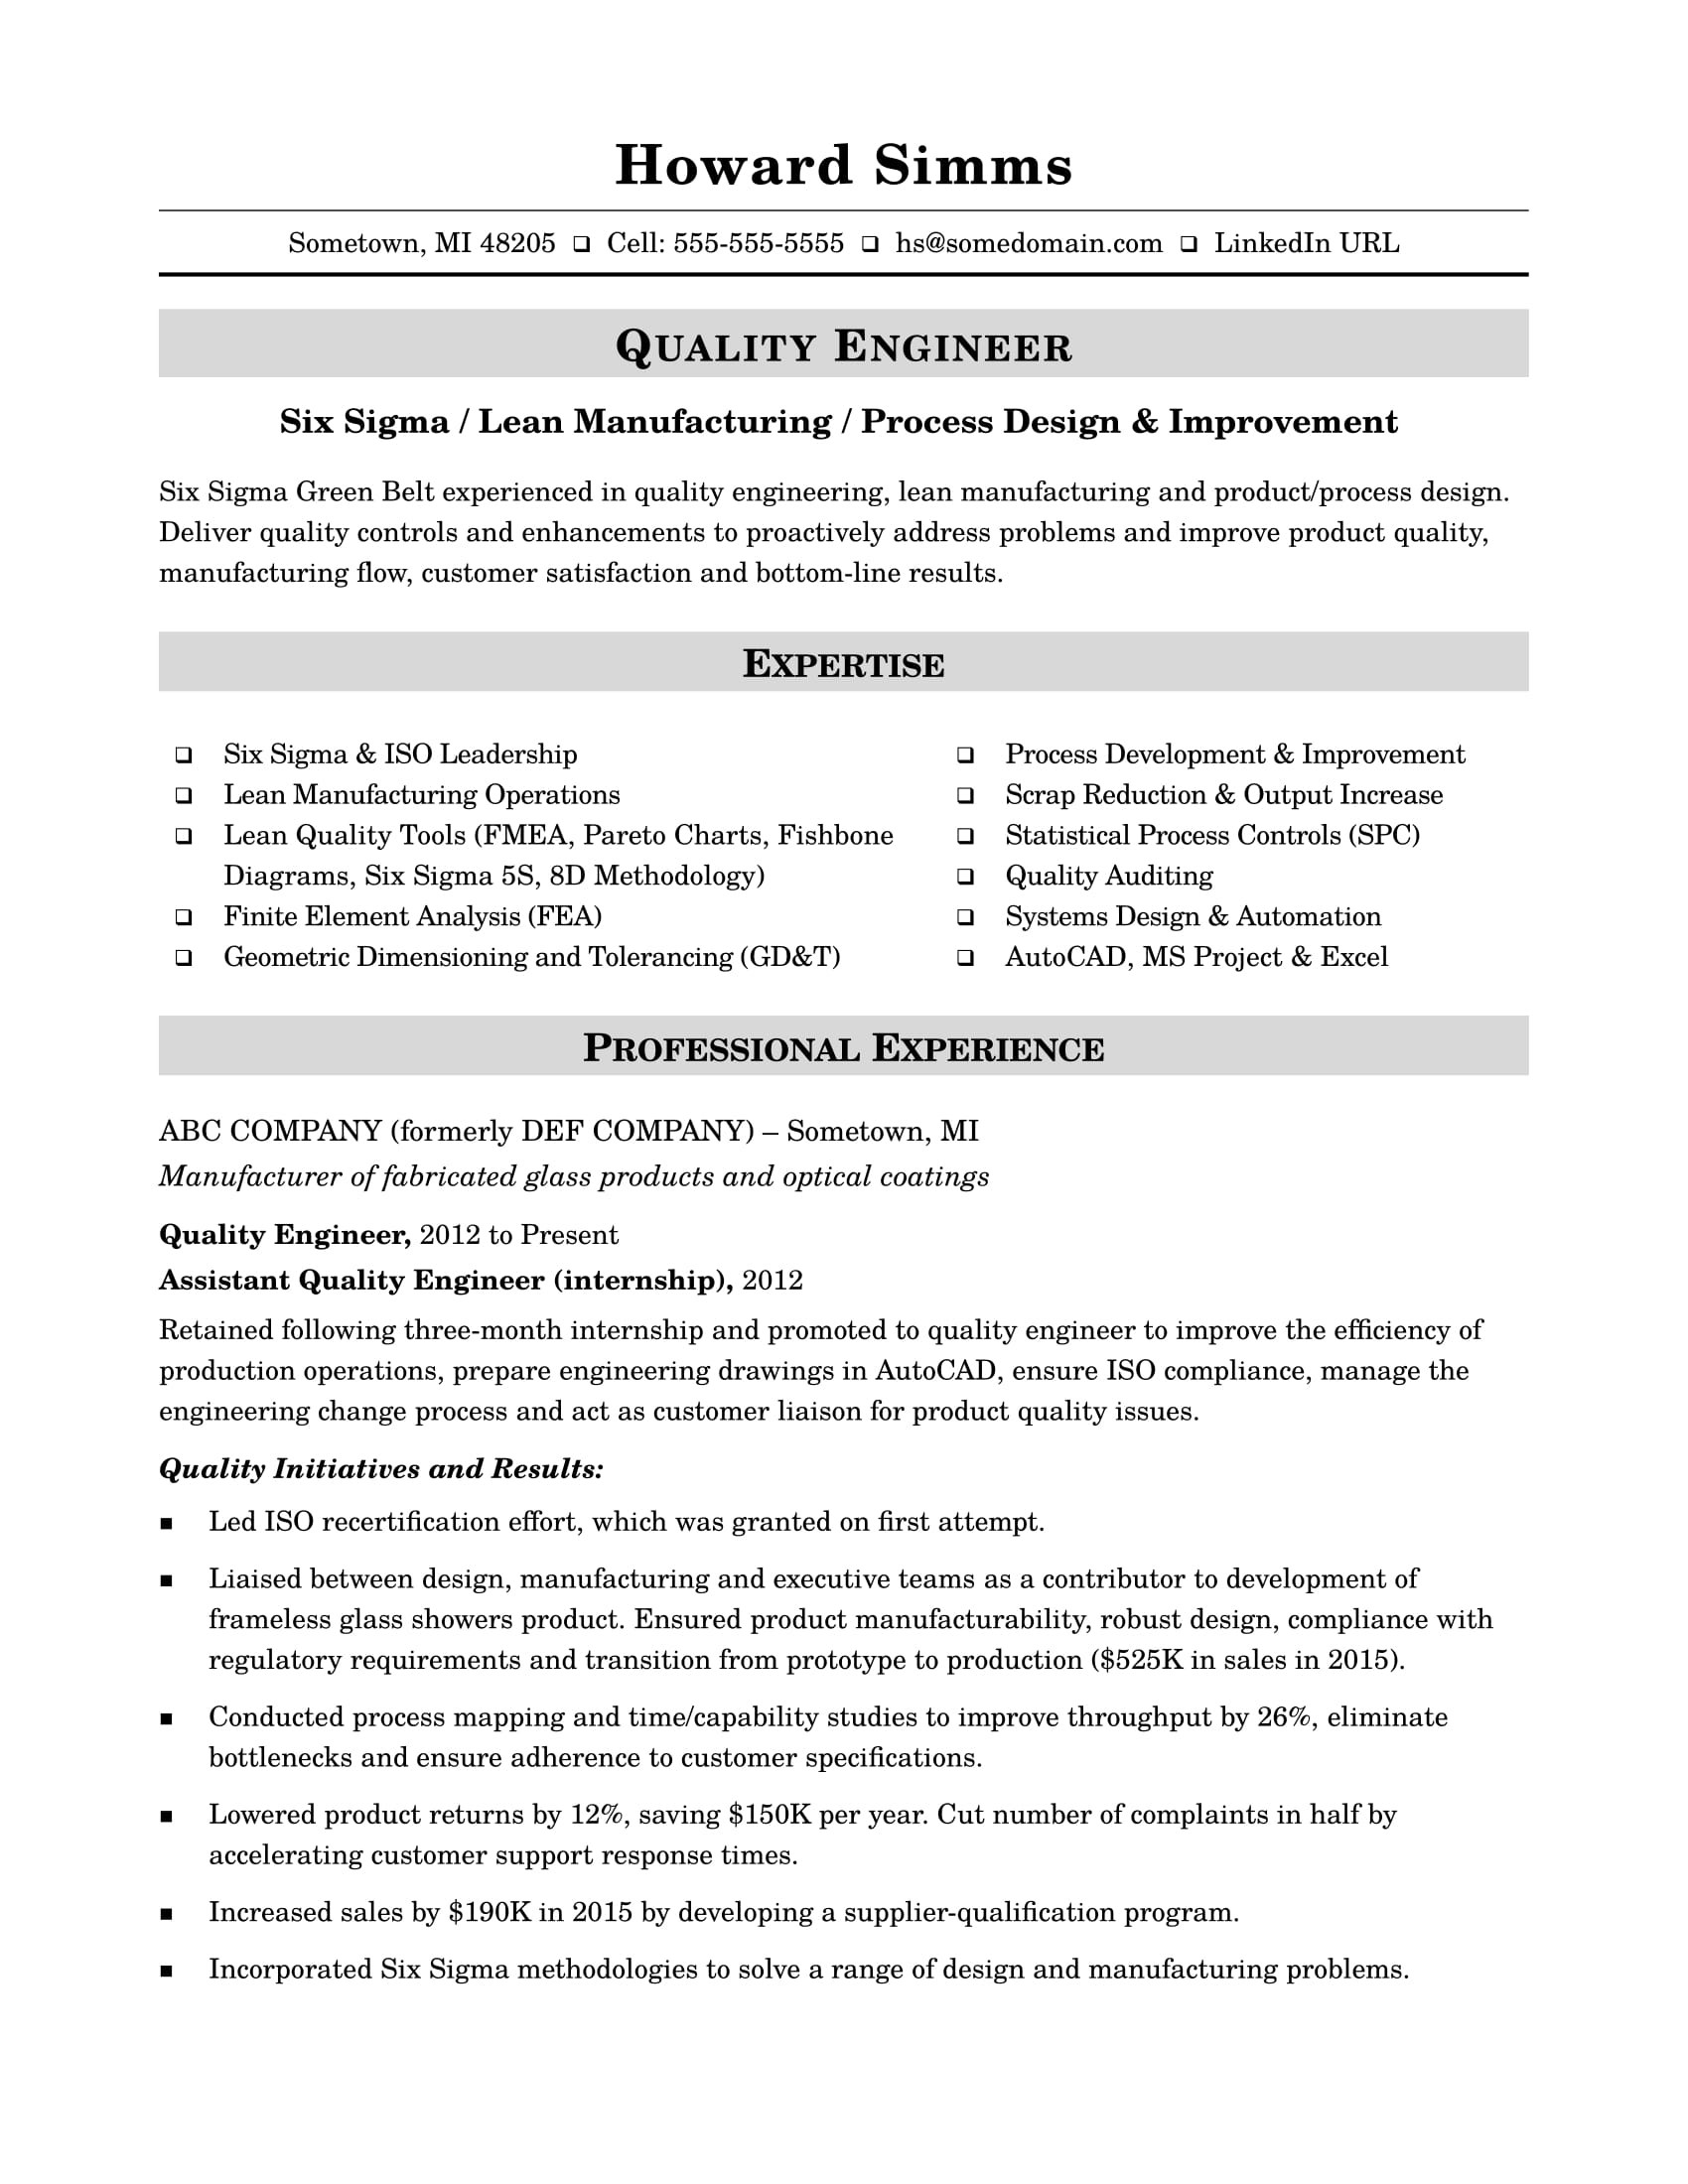 Lean Six Sigma Knowledge On Resume Sample Sample Resume for A Midlevel Quality Engineer Monster.com